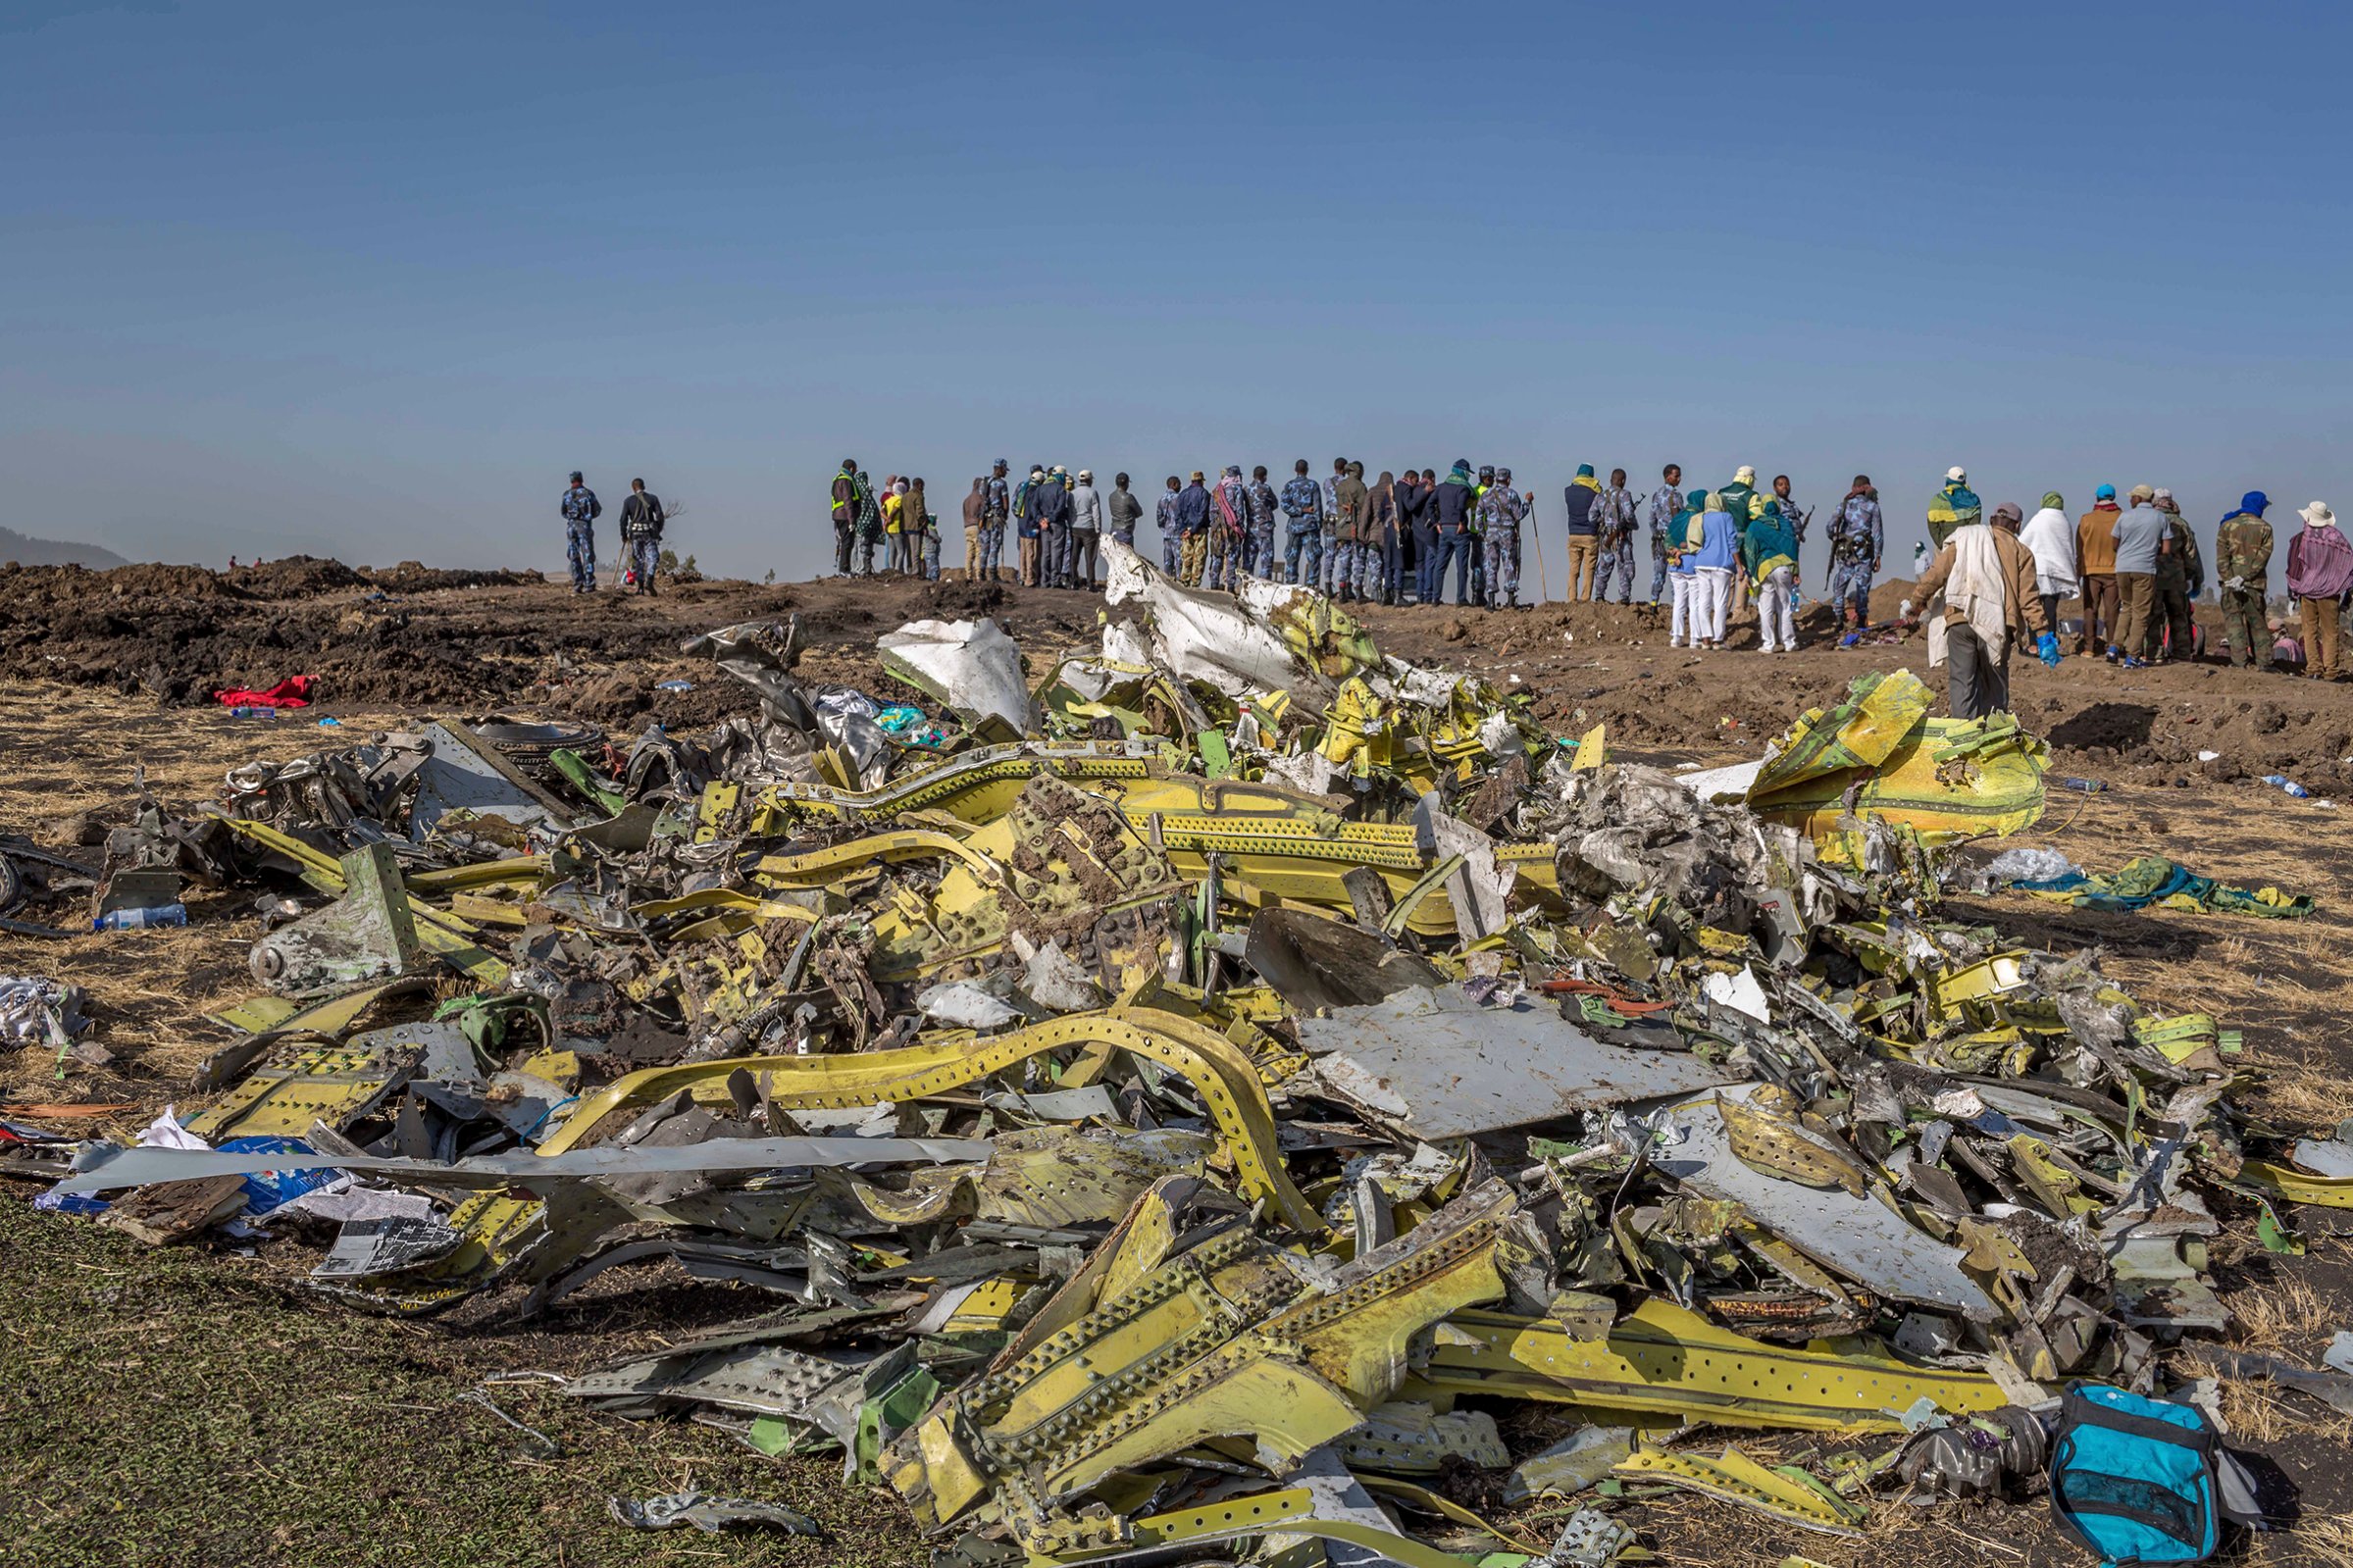 Wreckage near Bishoftu, south of Addis Ababa, after the March 10 Ethiopian Airlines crash